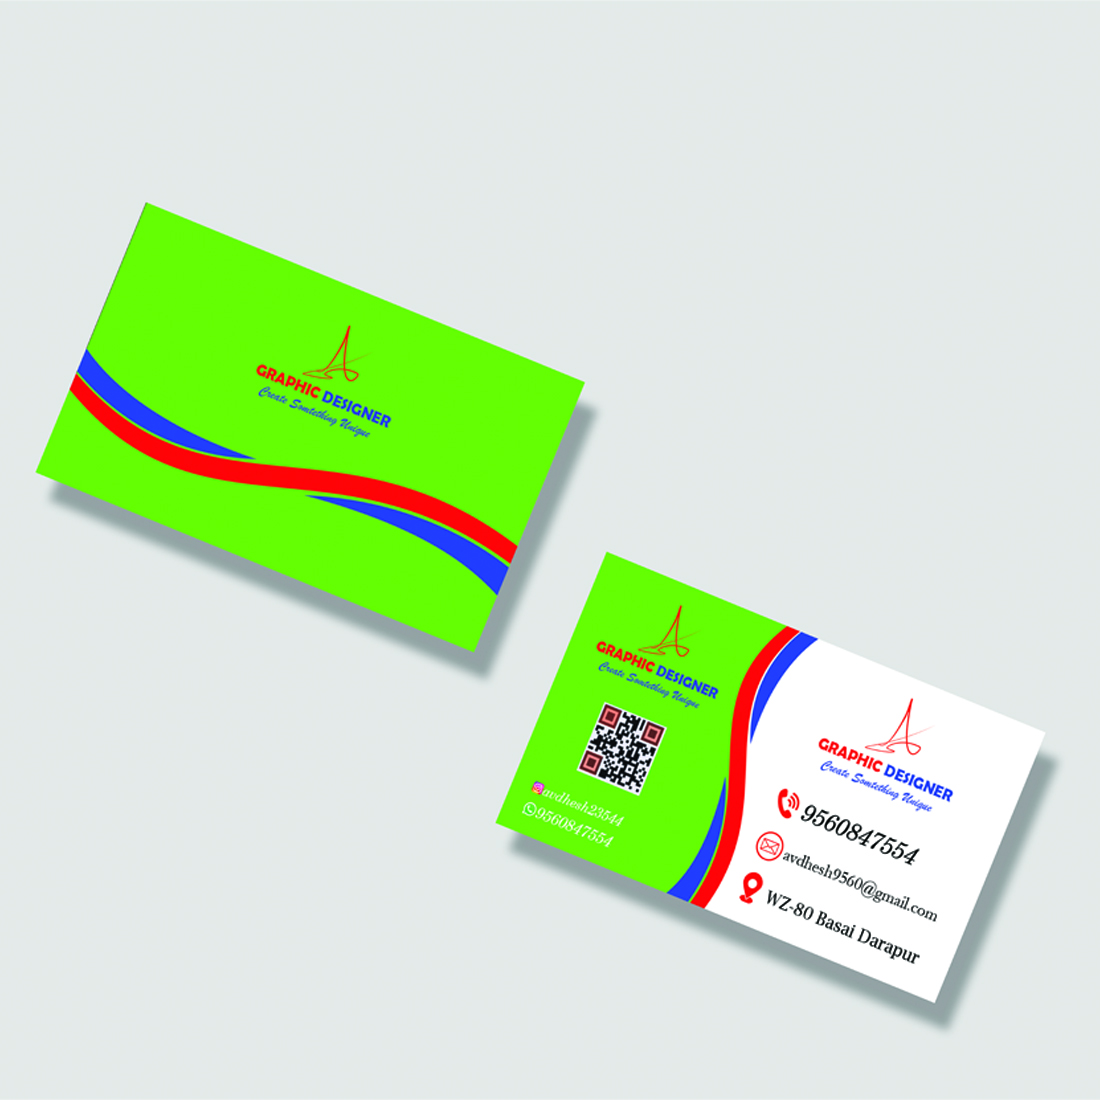 Business Card Design cover image.